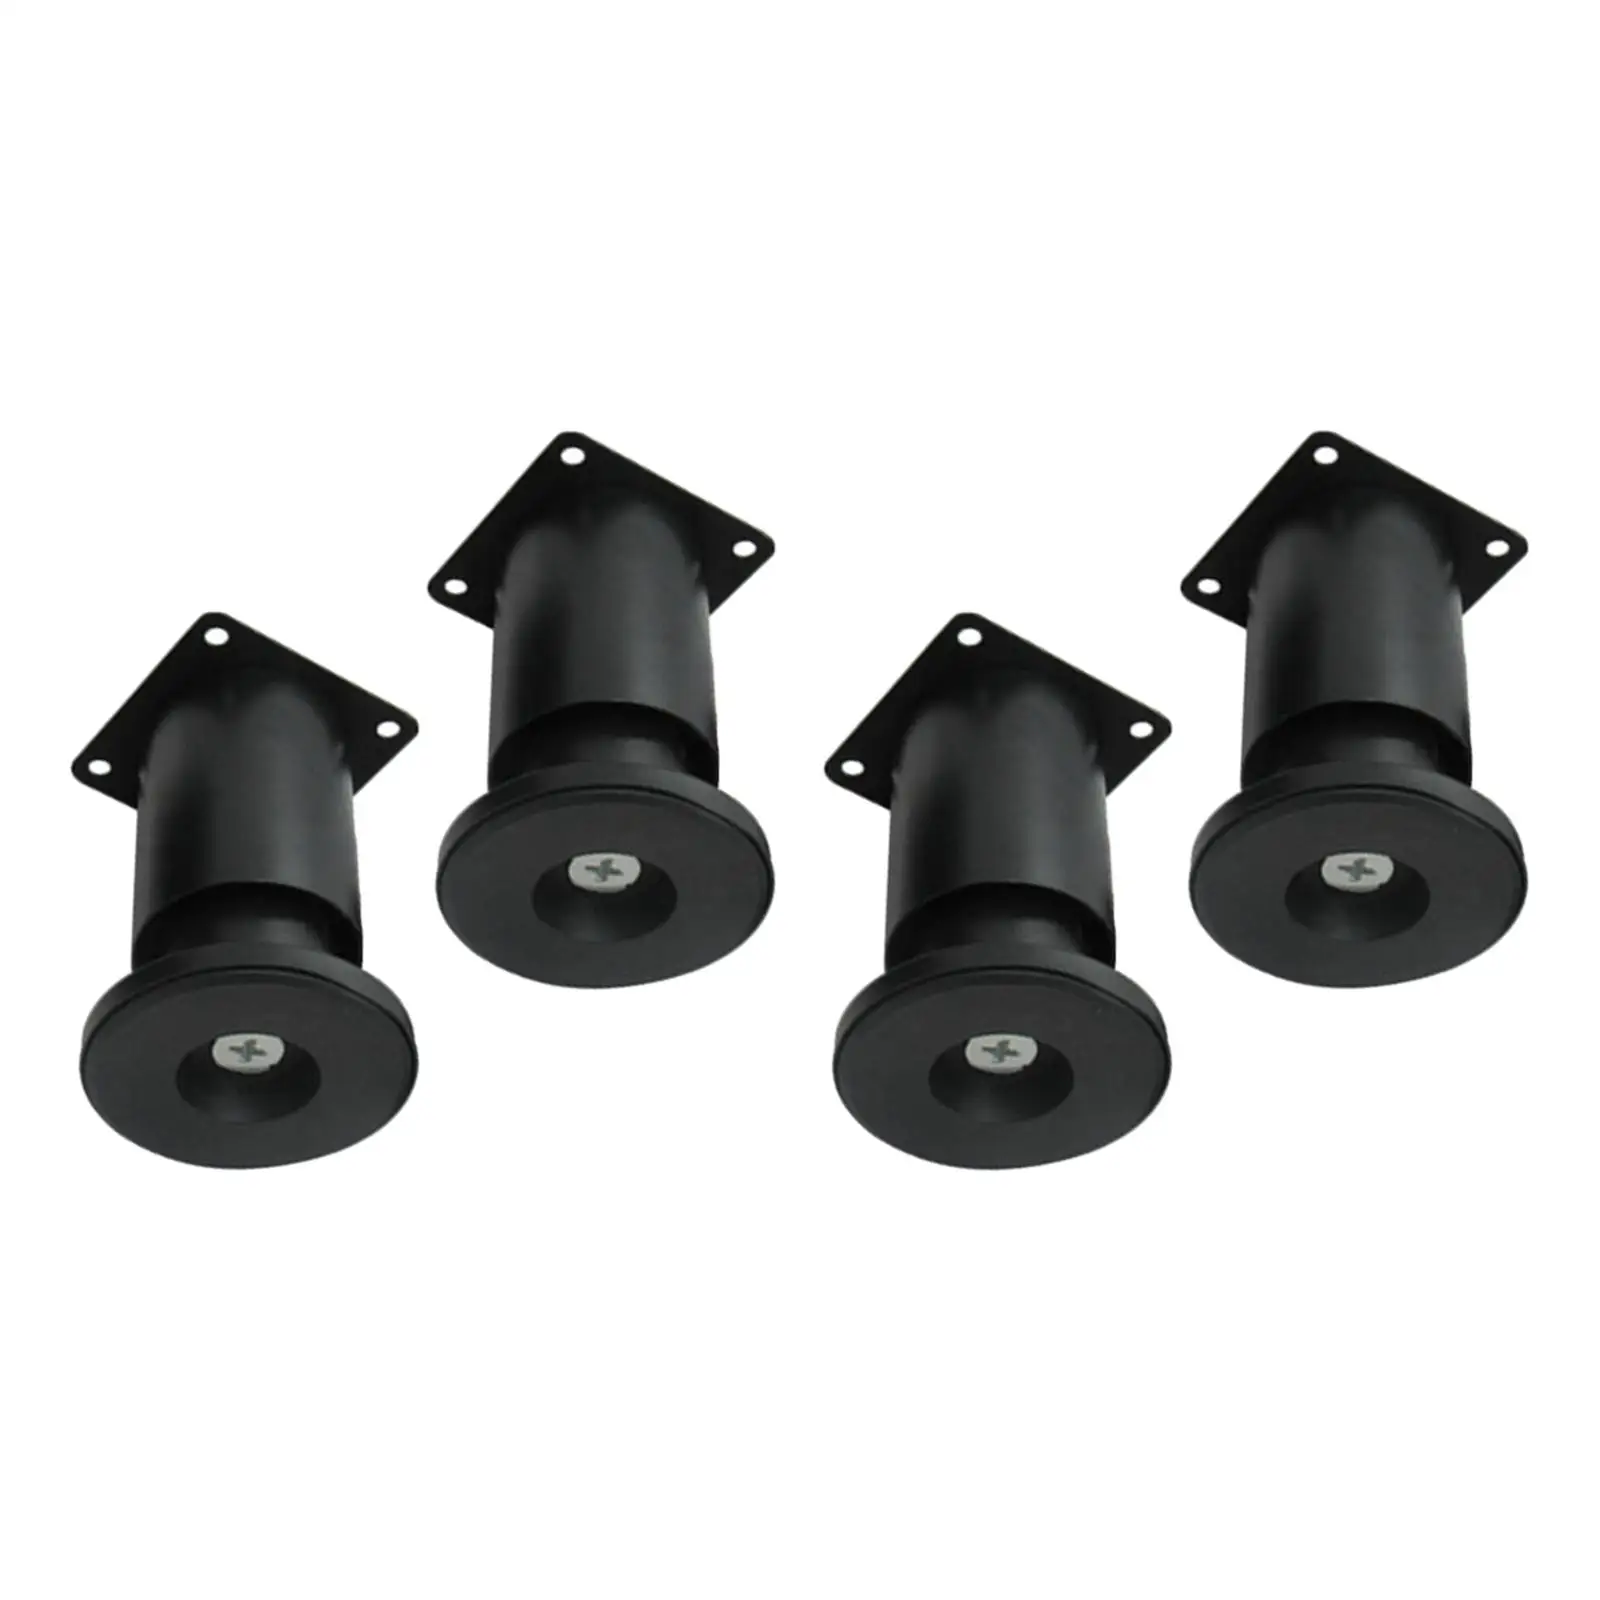 4Pcs Cabinet Foot Legs with Screws Easy to Install Reinforced Bed Supports Legs for Furniture TV Cabinets Shelves Sofas